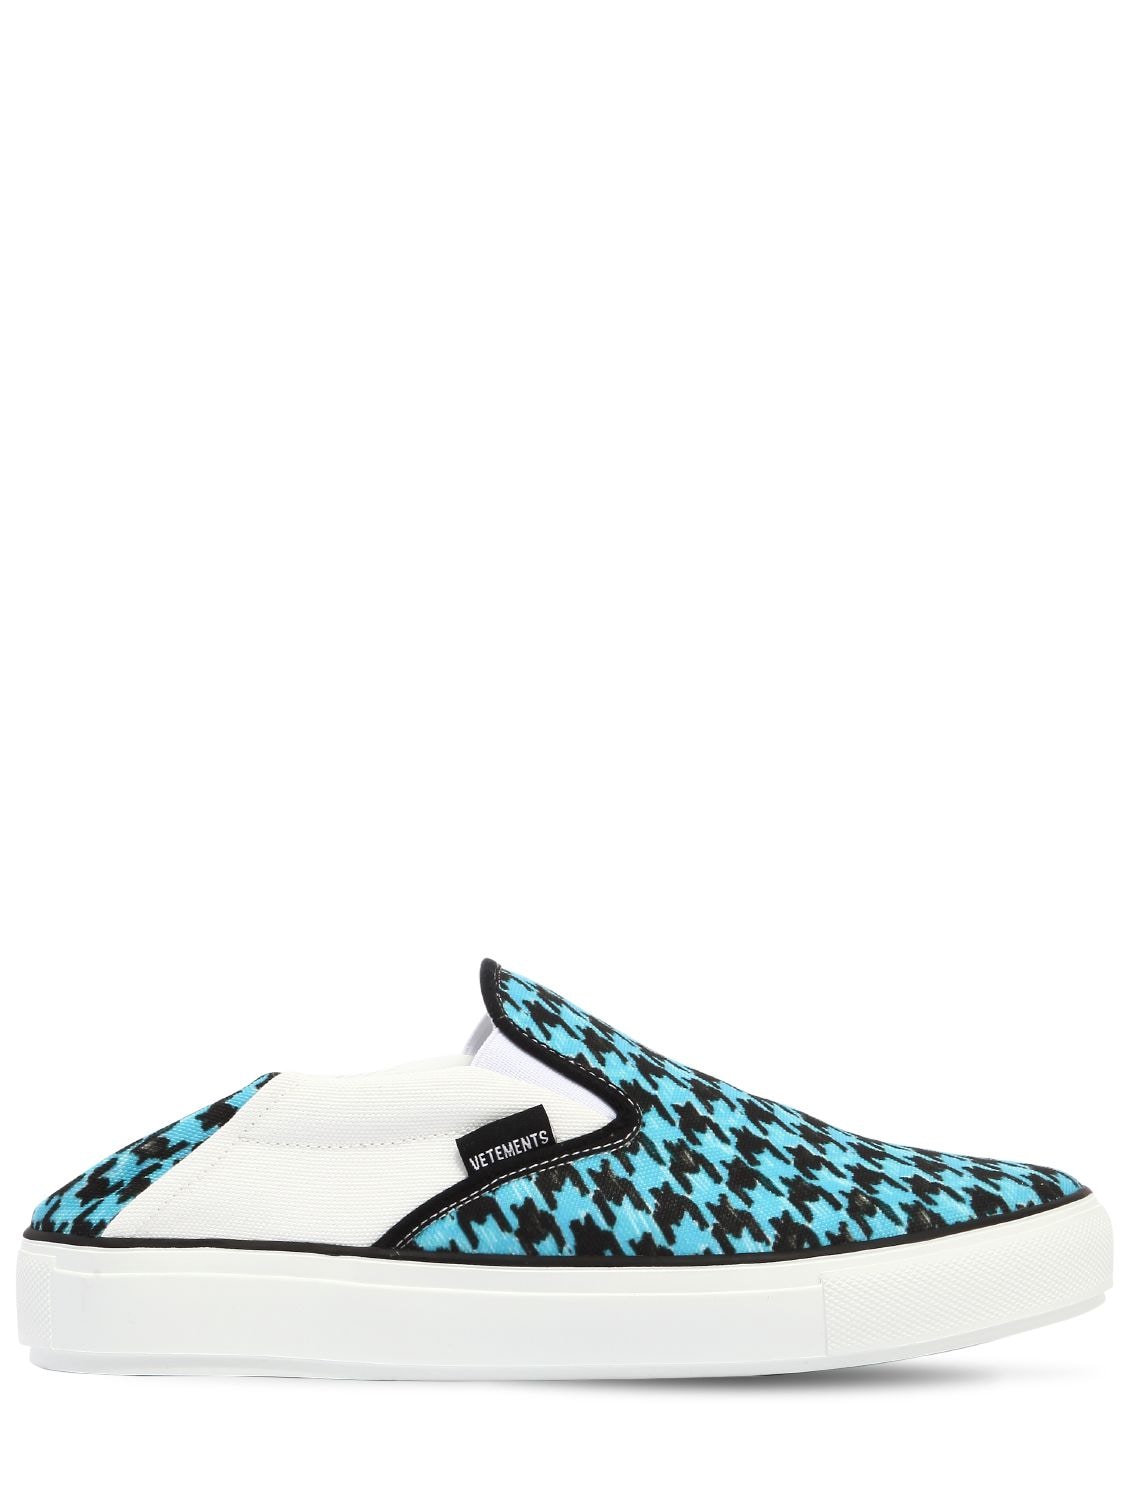 Vetements 20mm Babouche Canvas Slip-on Sneakers In Blue